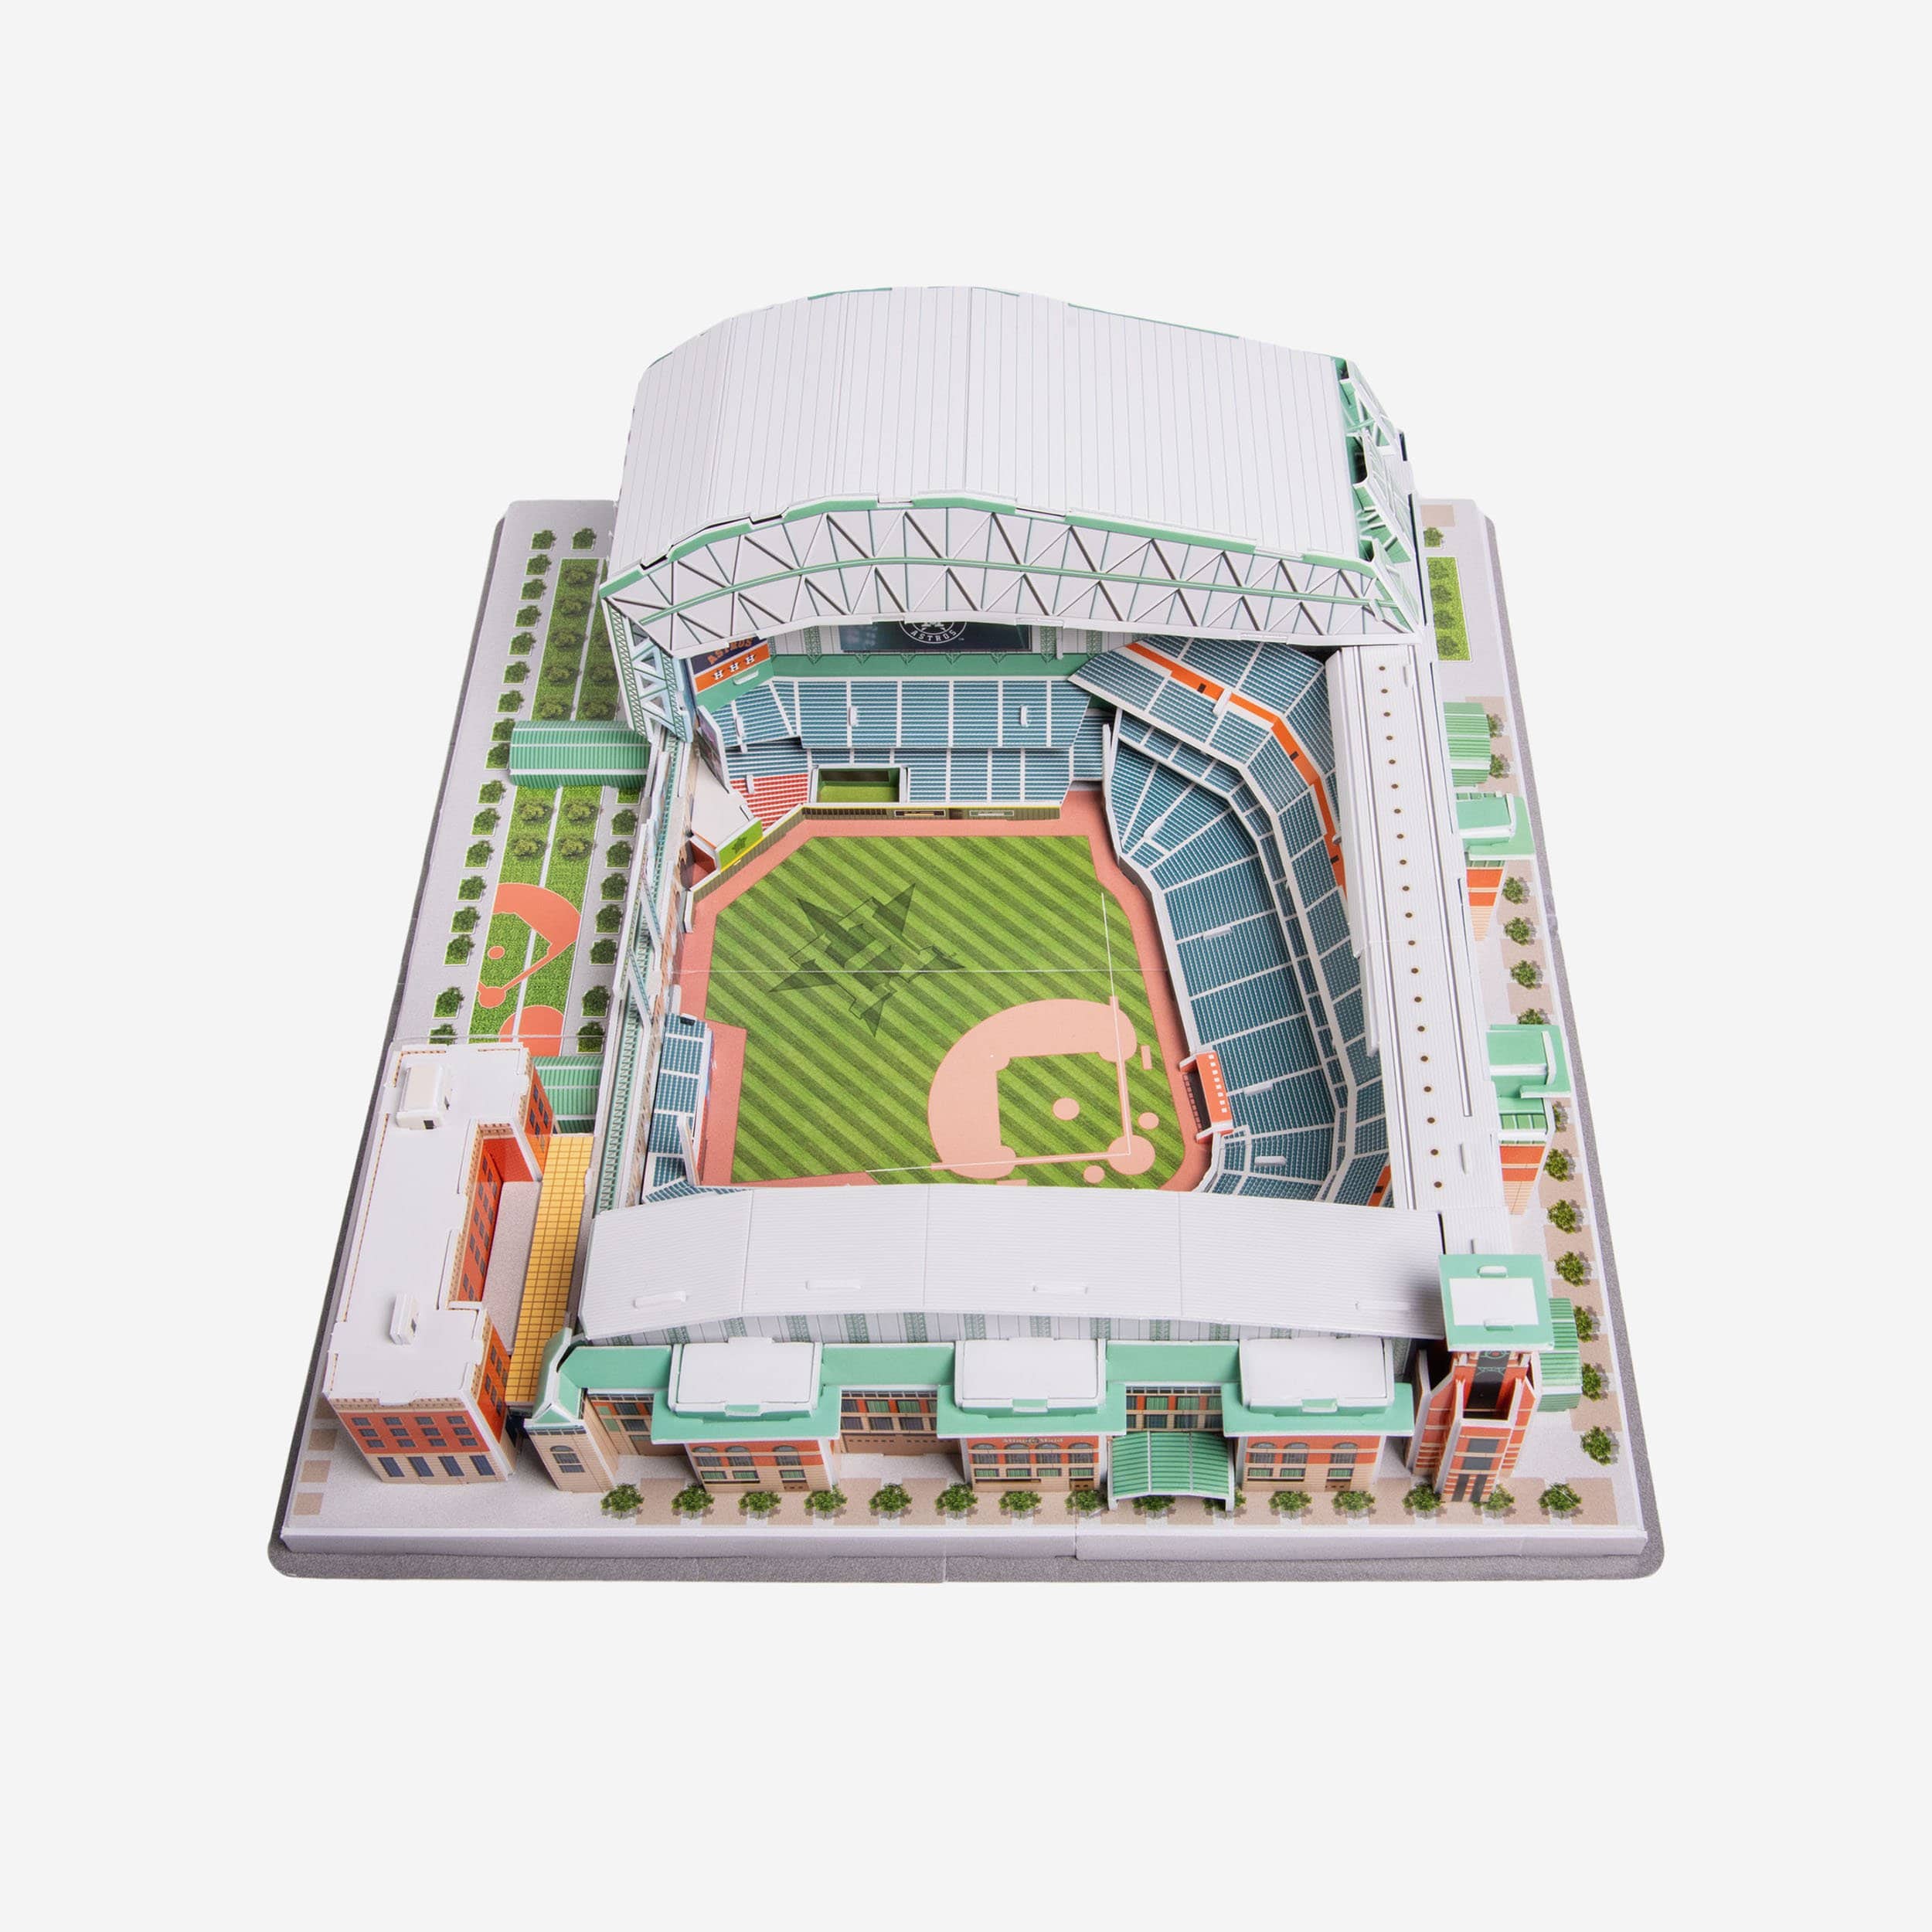 New Minute Maid Park display technology on tap for 2023 - Ballpark Digest